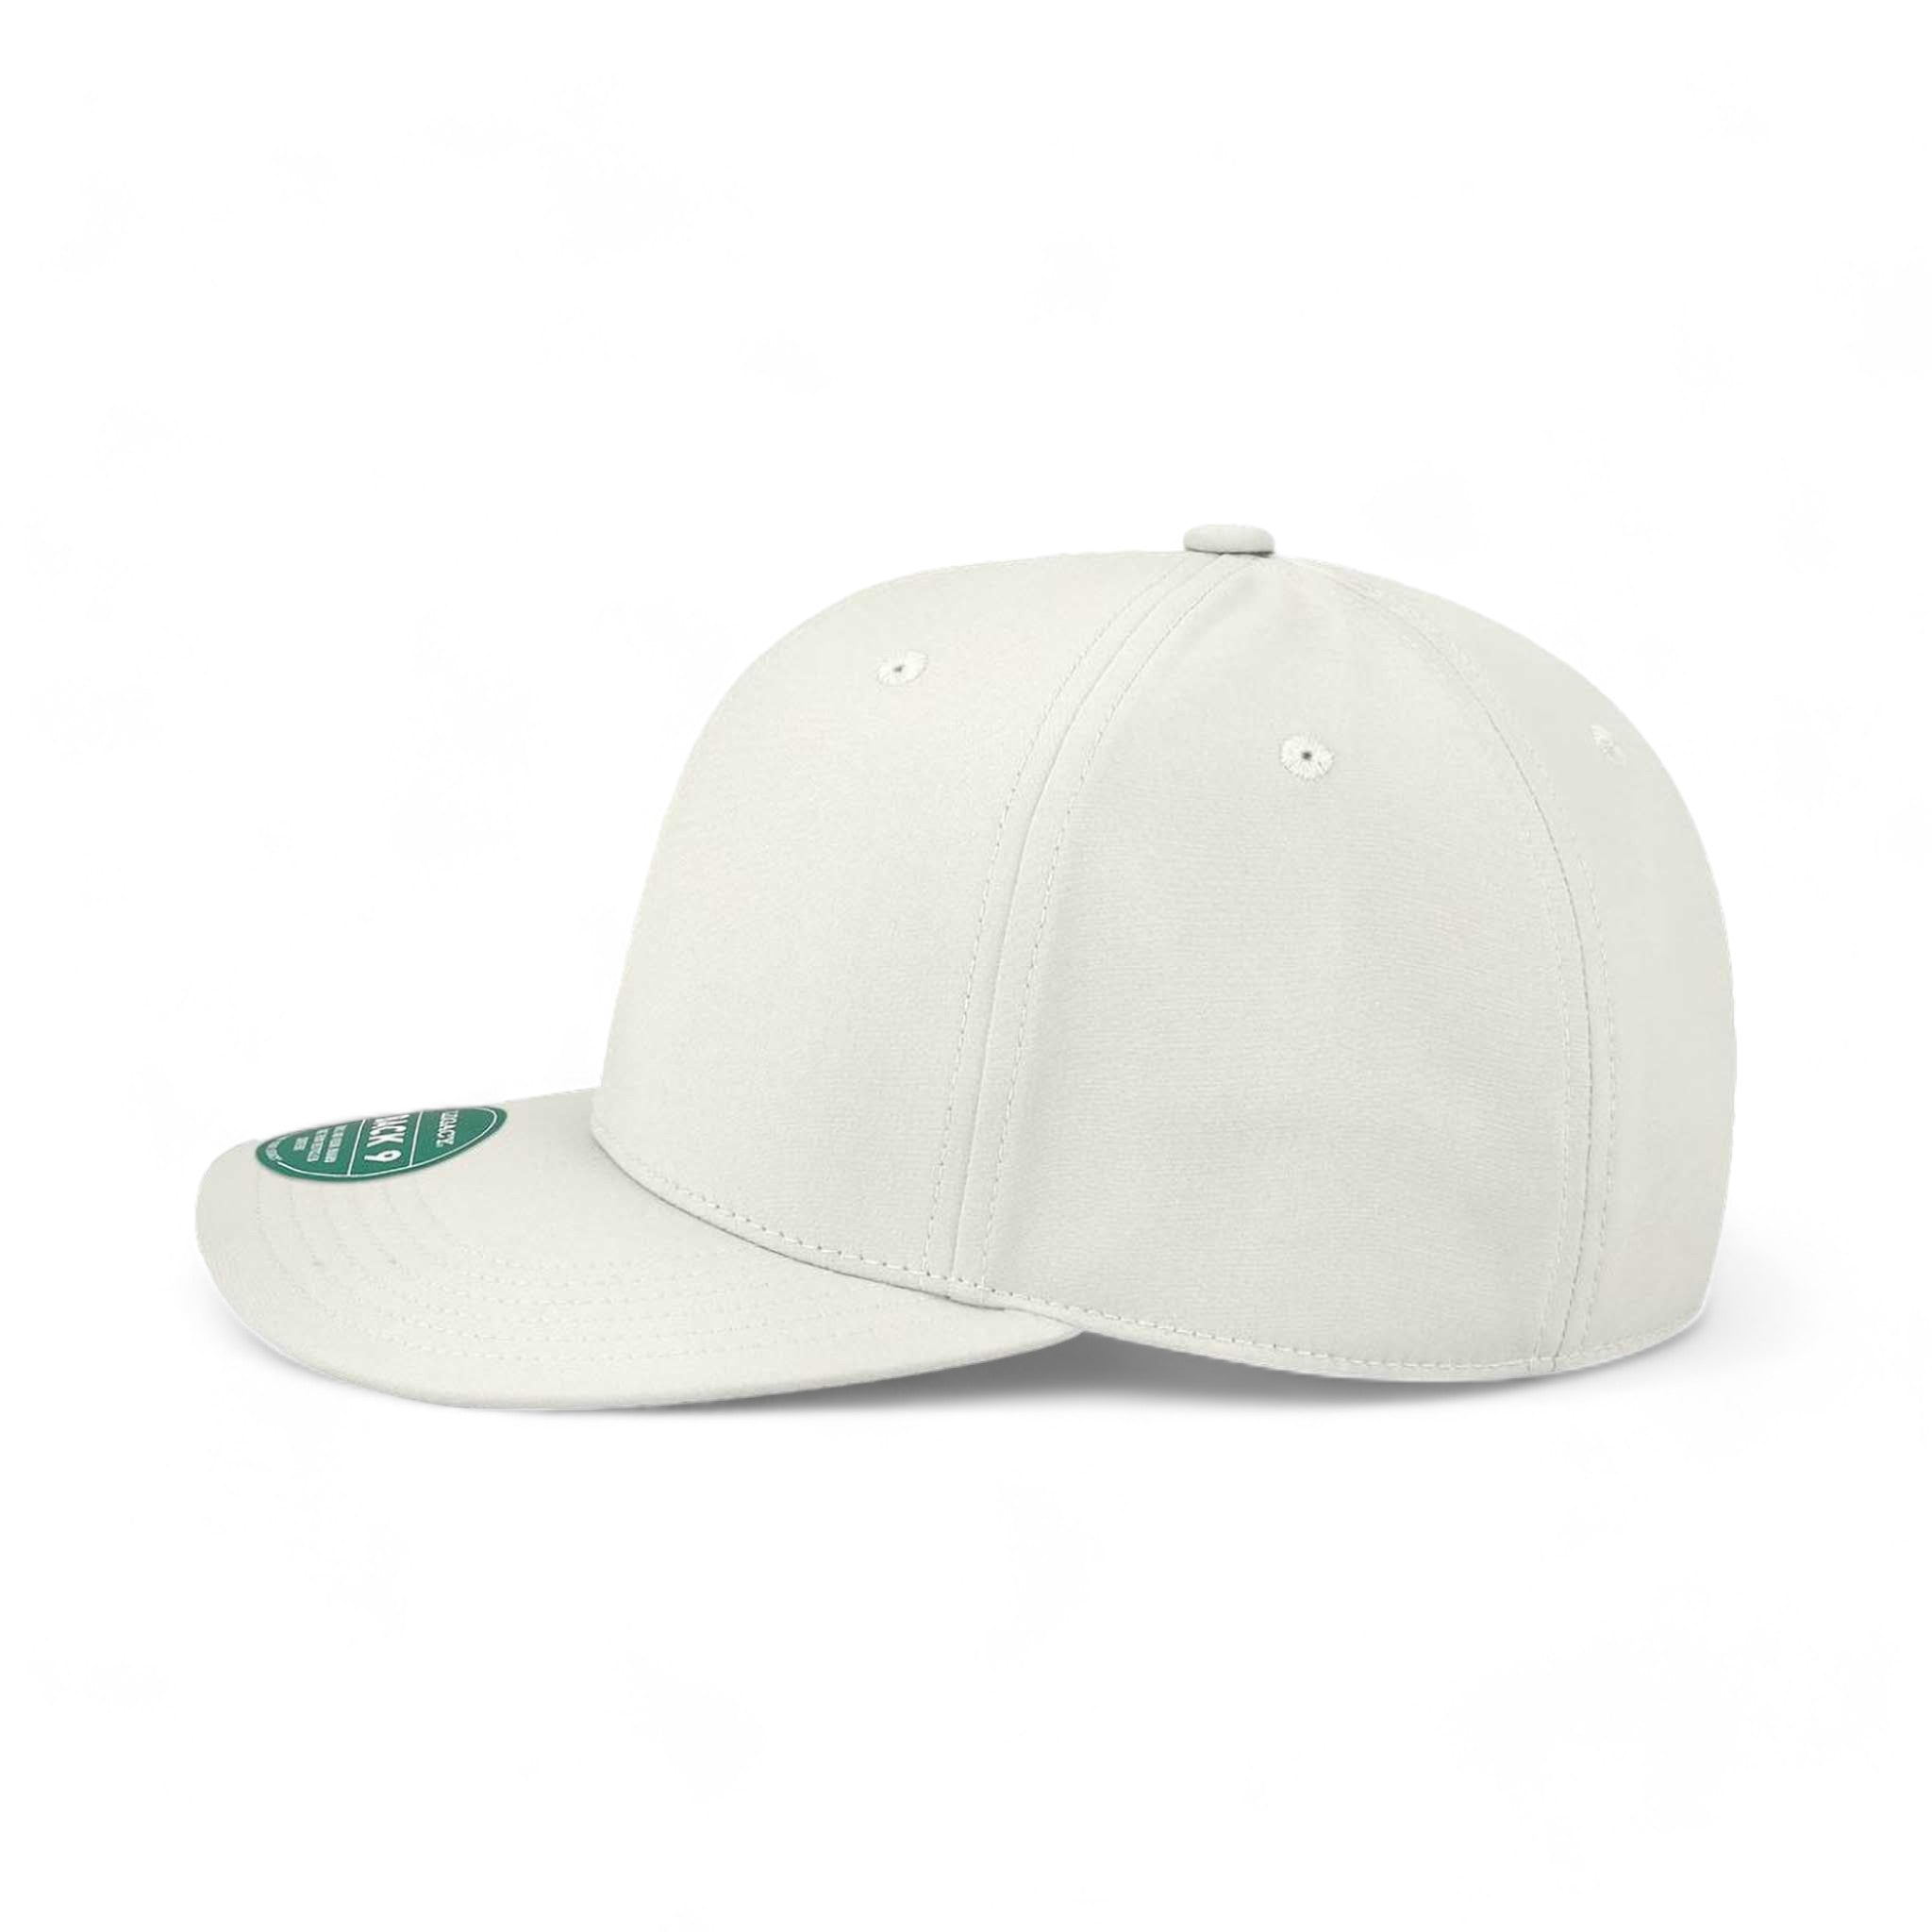 Side view of LEGACY B9A custom hat in white